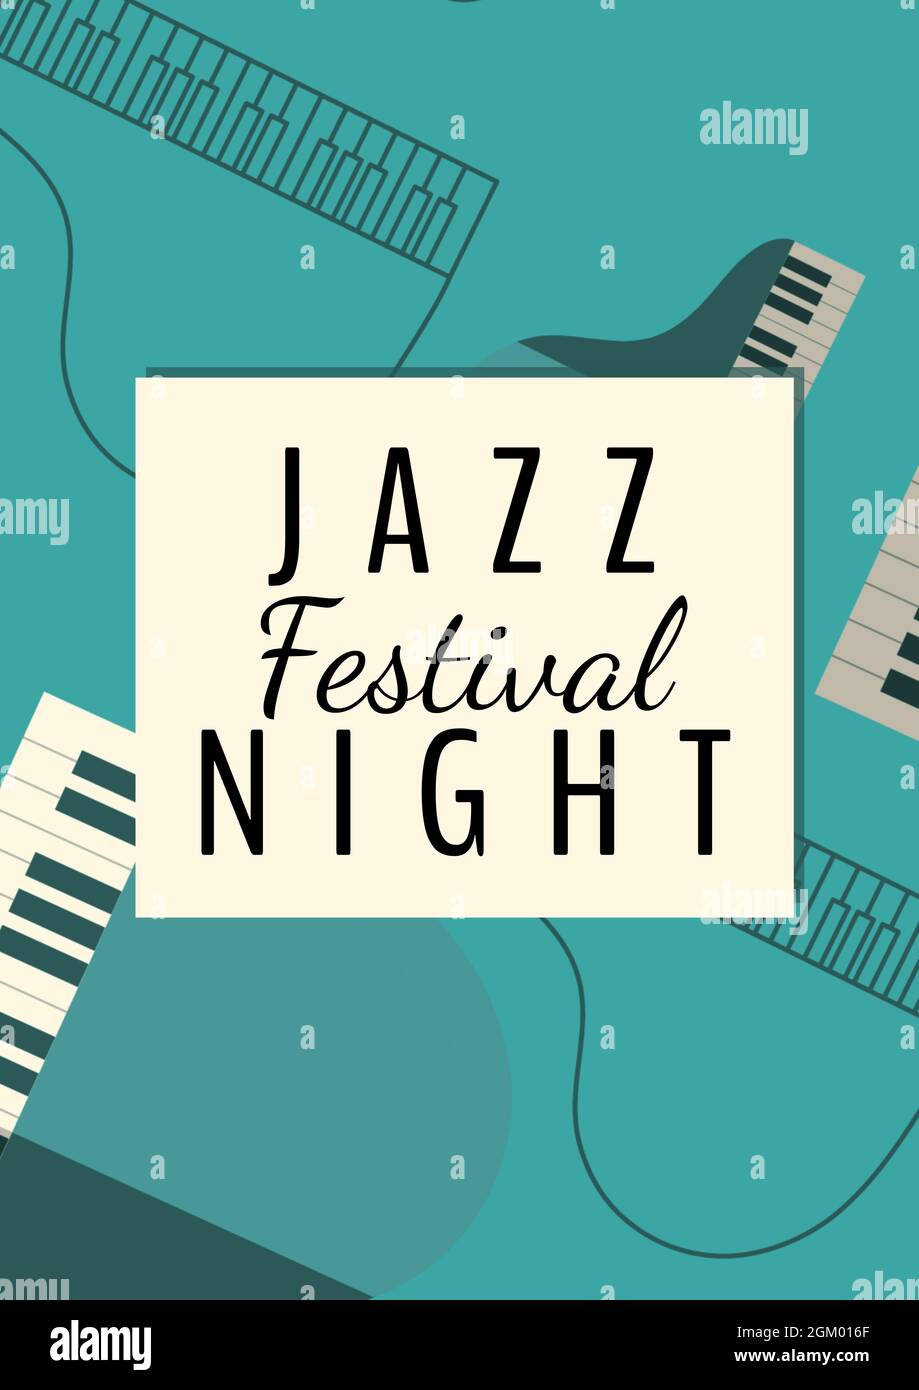 Jazz festival night text banner against musical instruments on green background Stock Photo